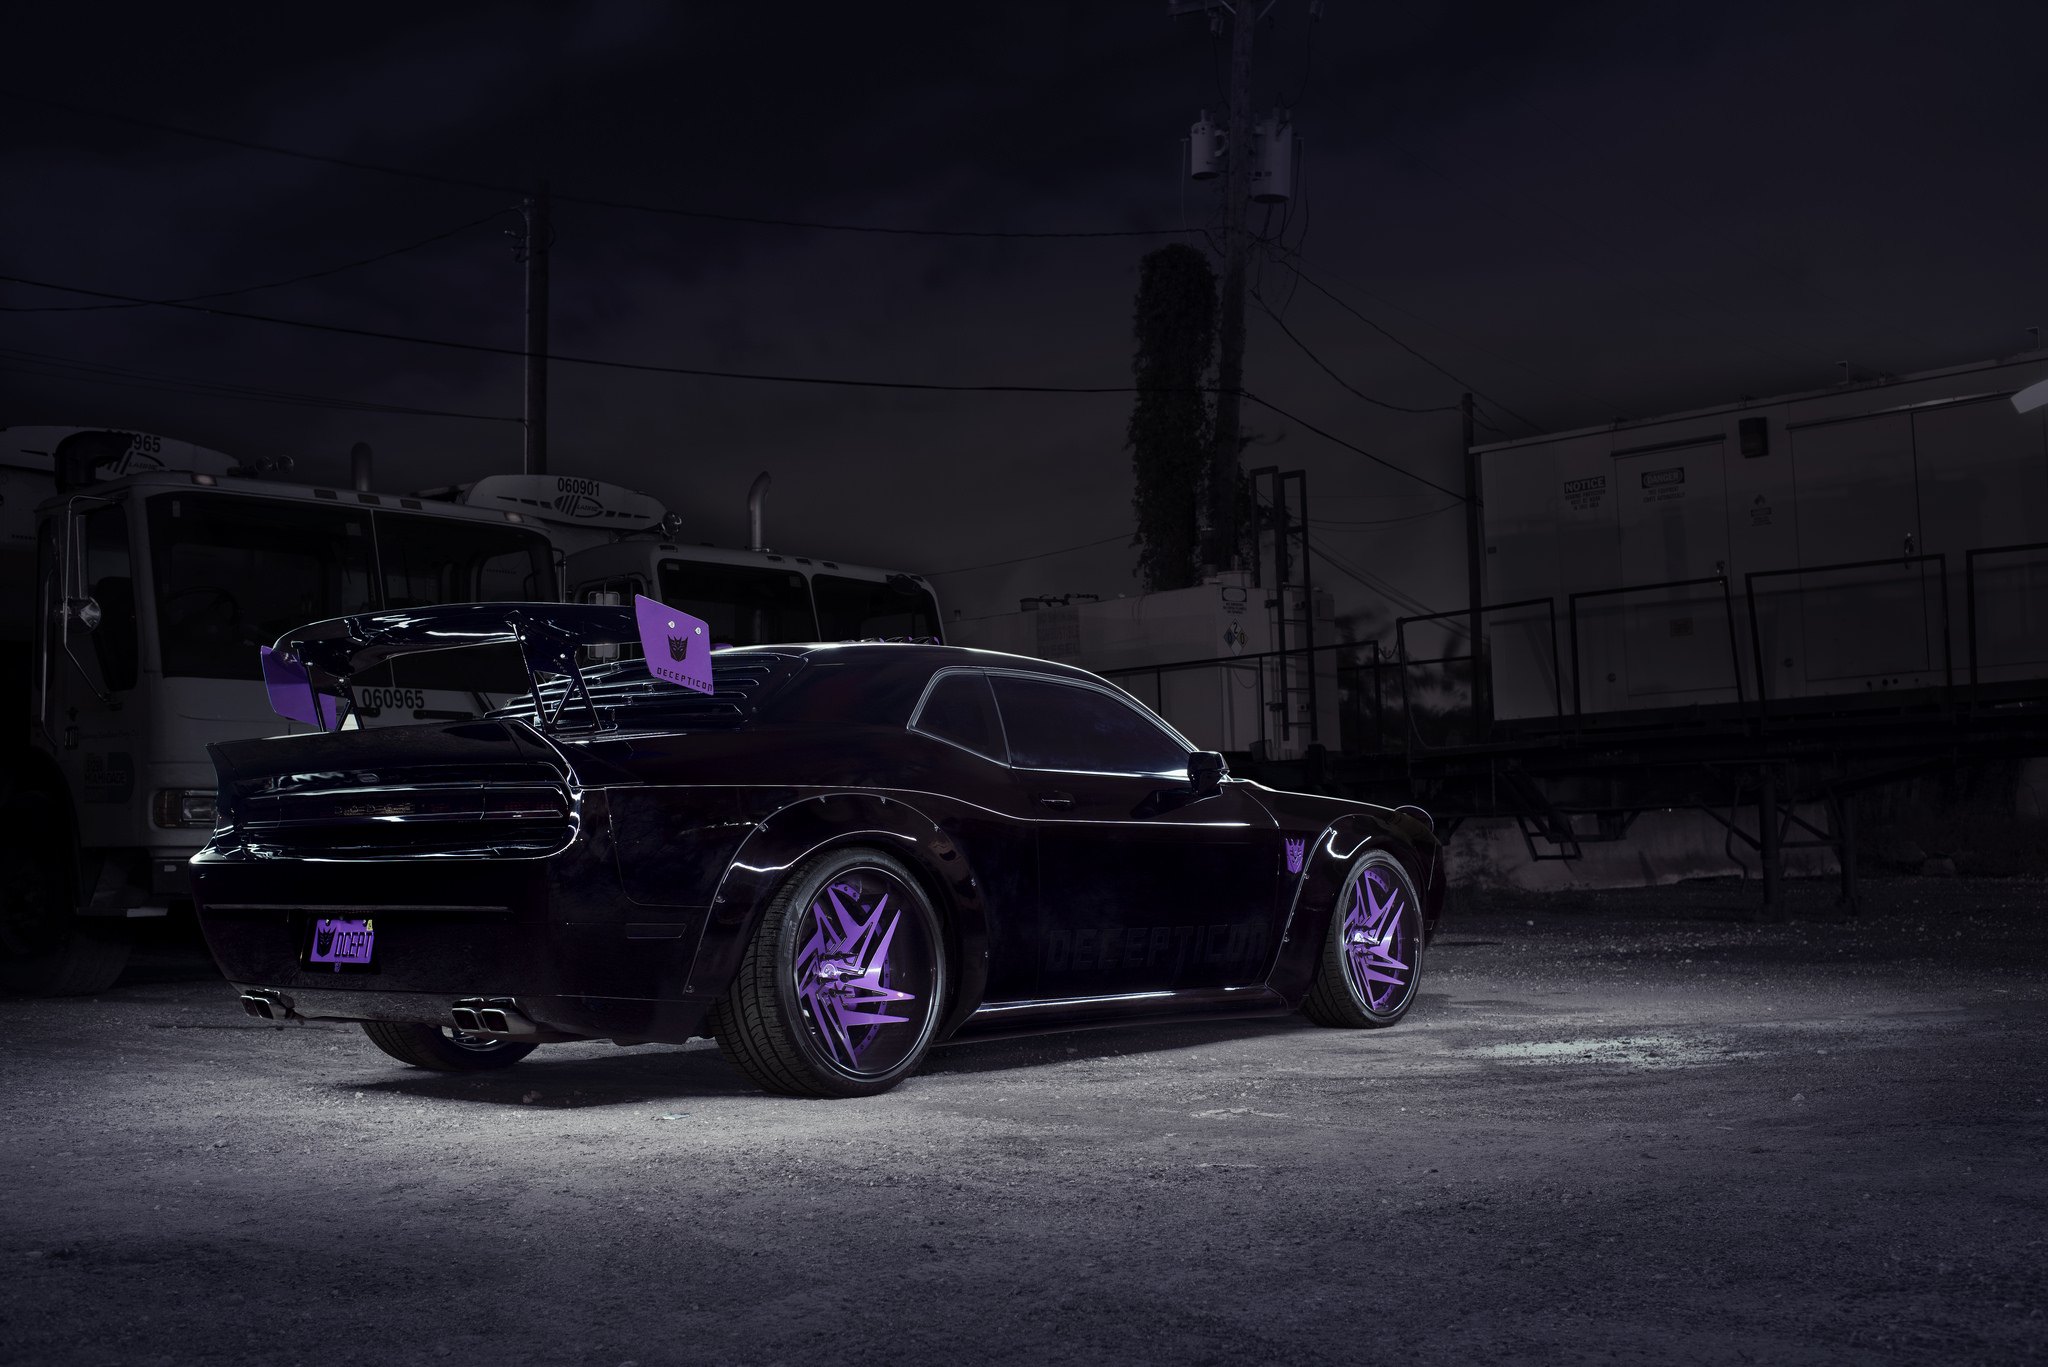 22 Inch DUB Wheels with Purple Elements on Dodge Challenger - Photo by DUB